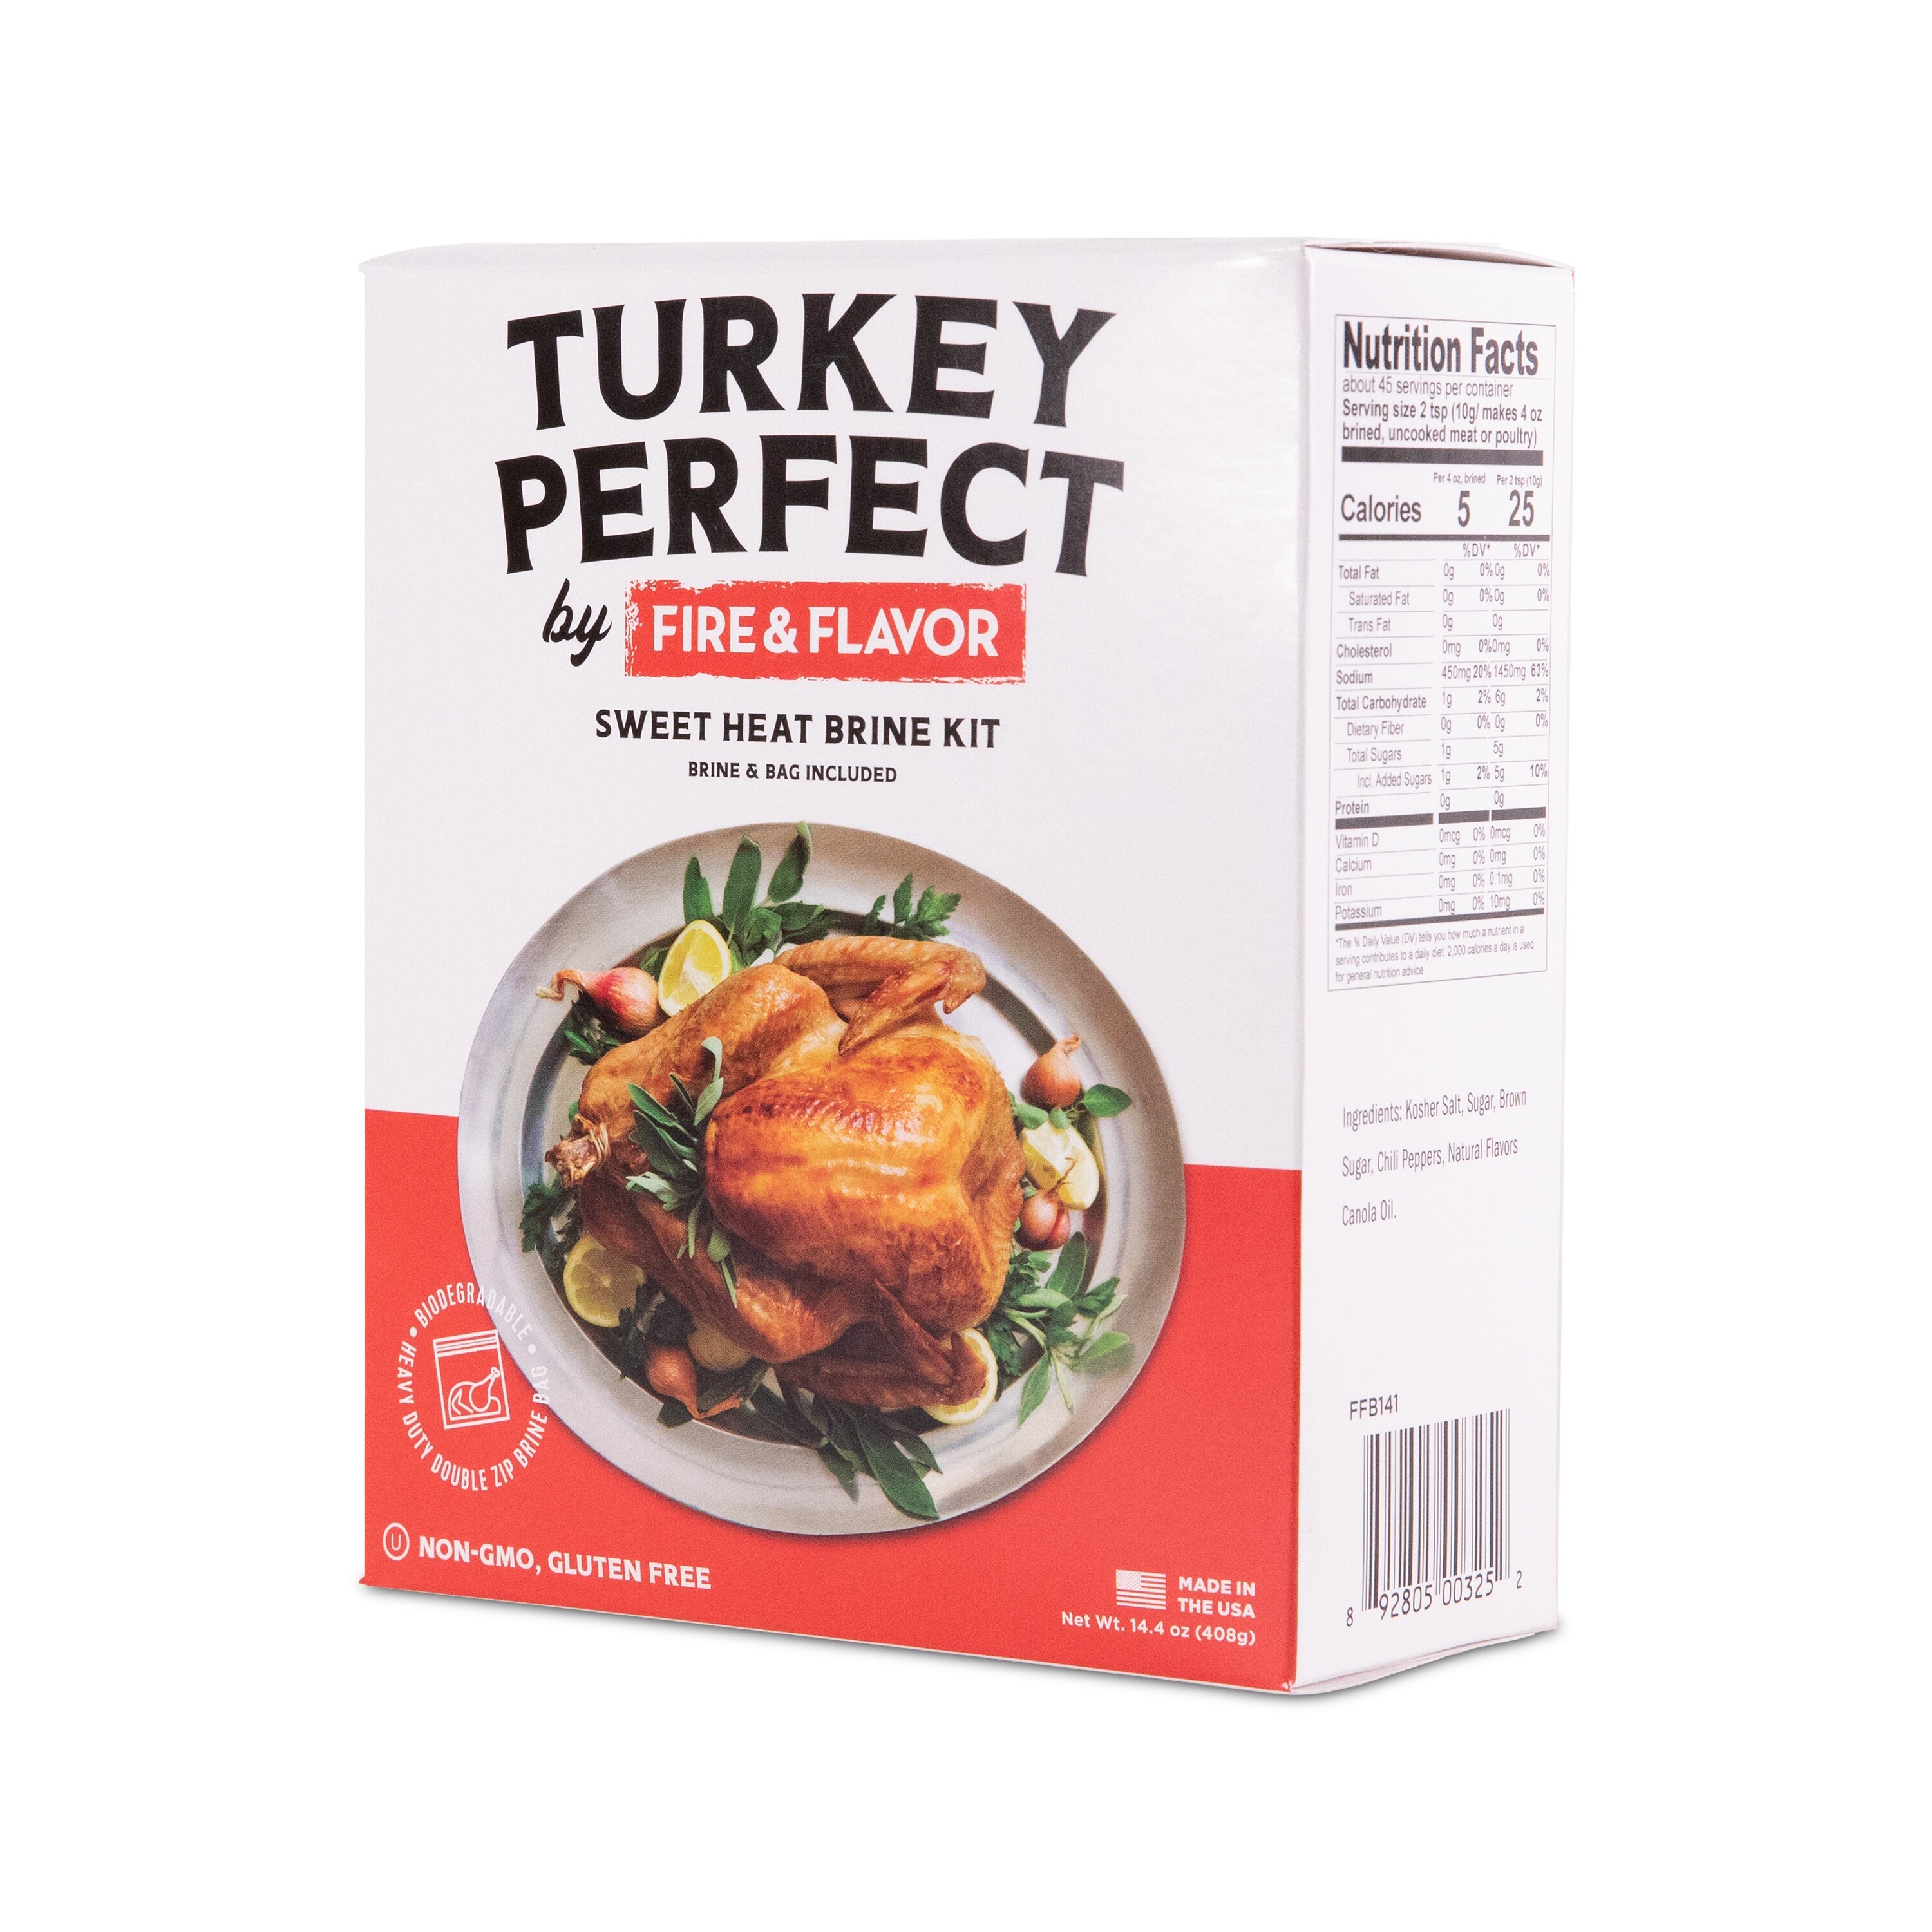 Turkey Perfect by Fire & Flavor All-Natural Sweet Heat Brine Kit